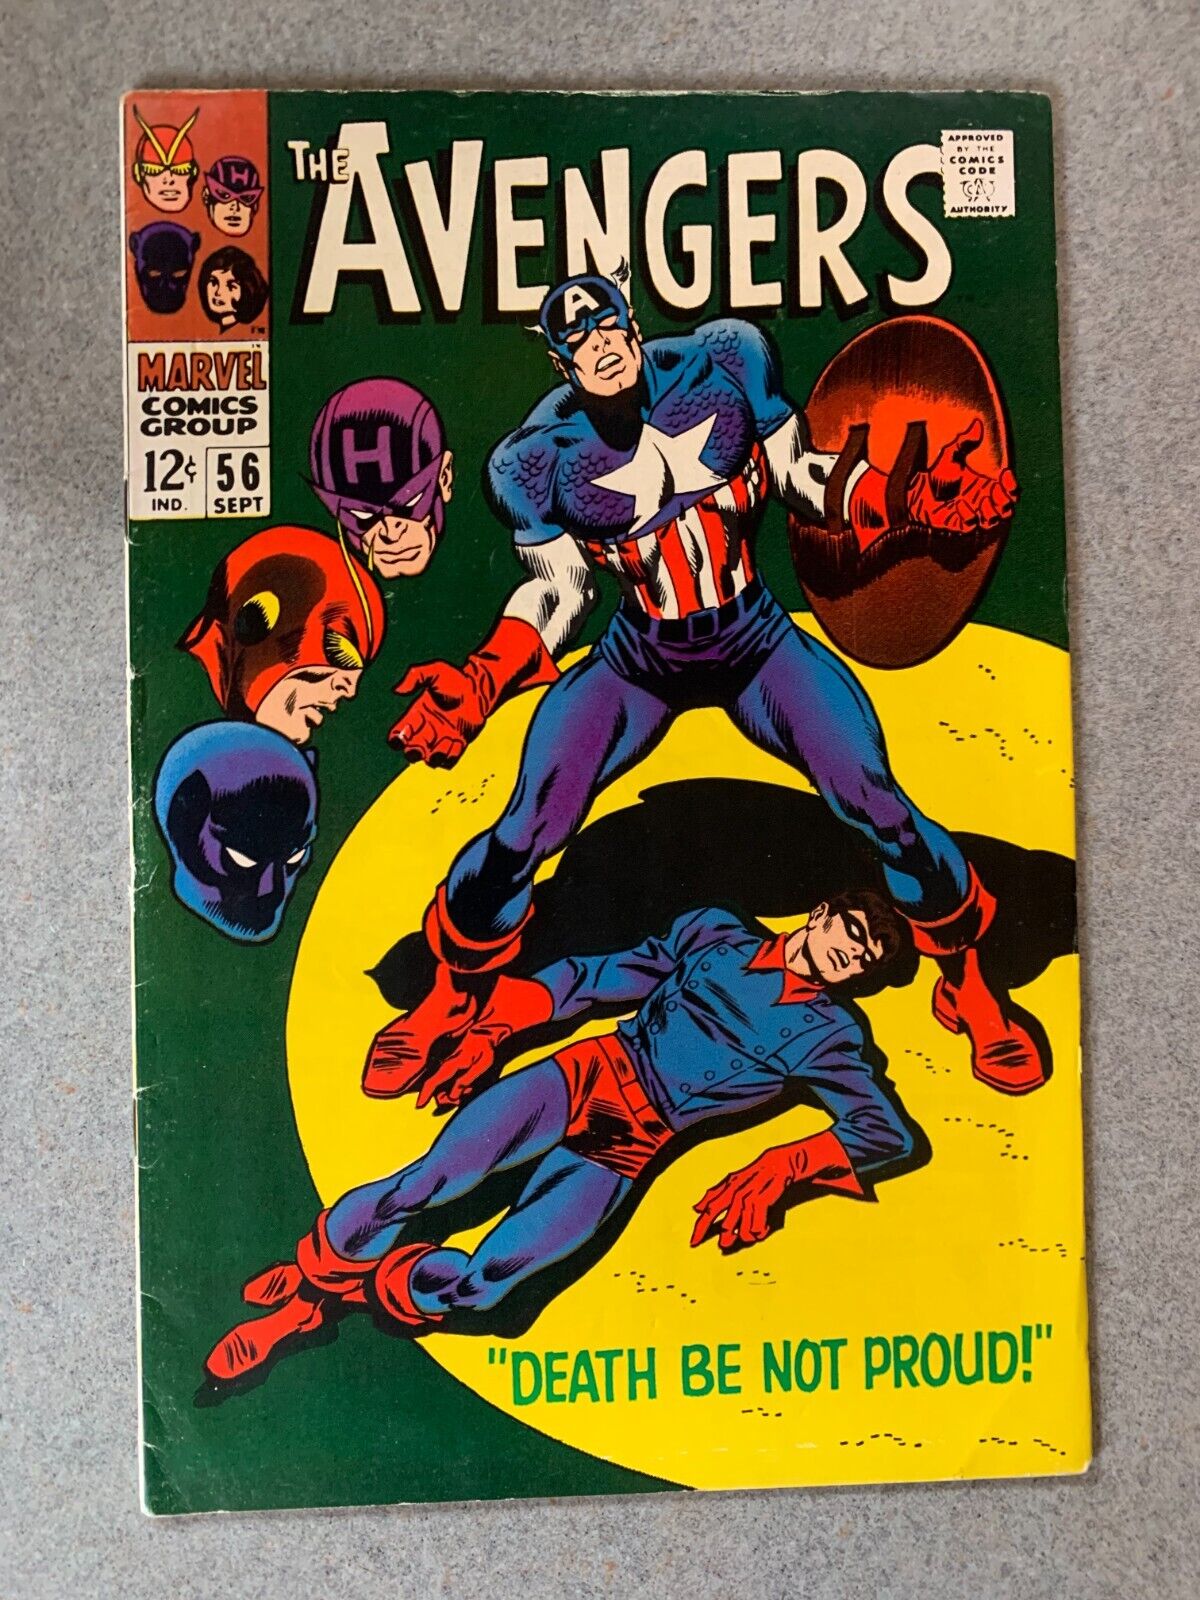 The Avengers #56 - Sep 1968 - Vol.1 - Marvel - Silver Age - Minor Key - 6.5 FN+